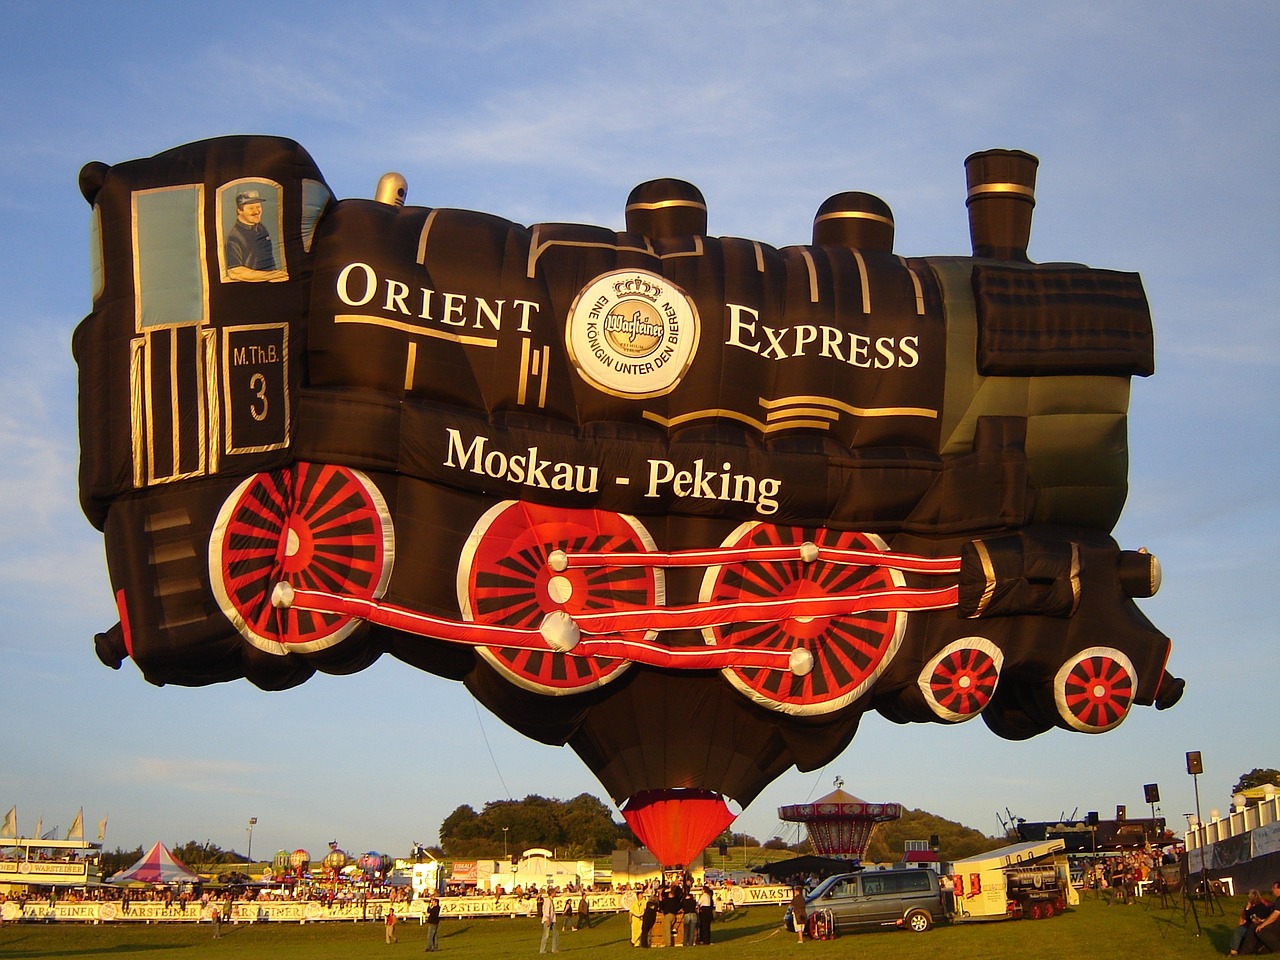 The Orient Express - Glamour and Luxury on the Tracks